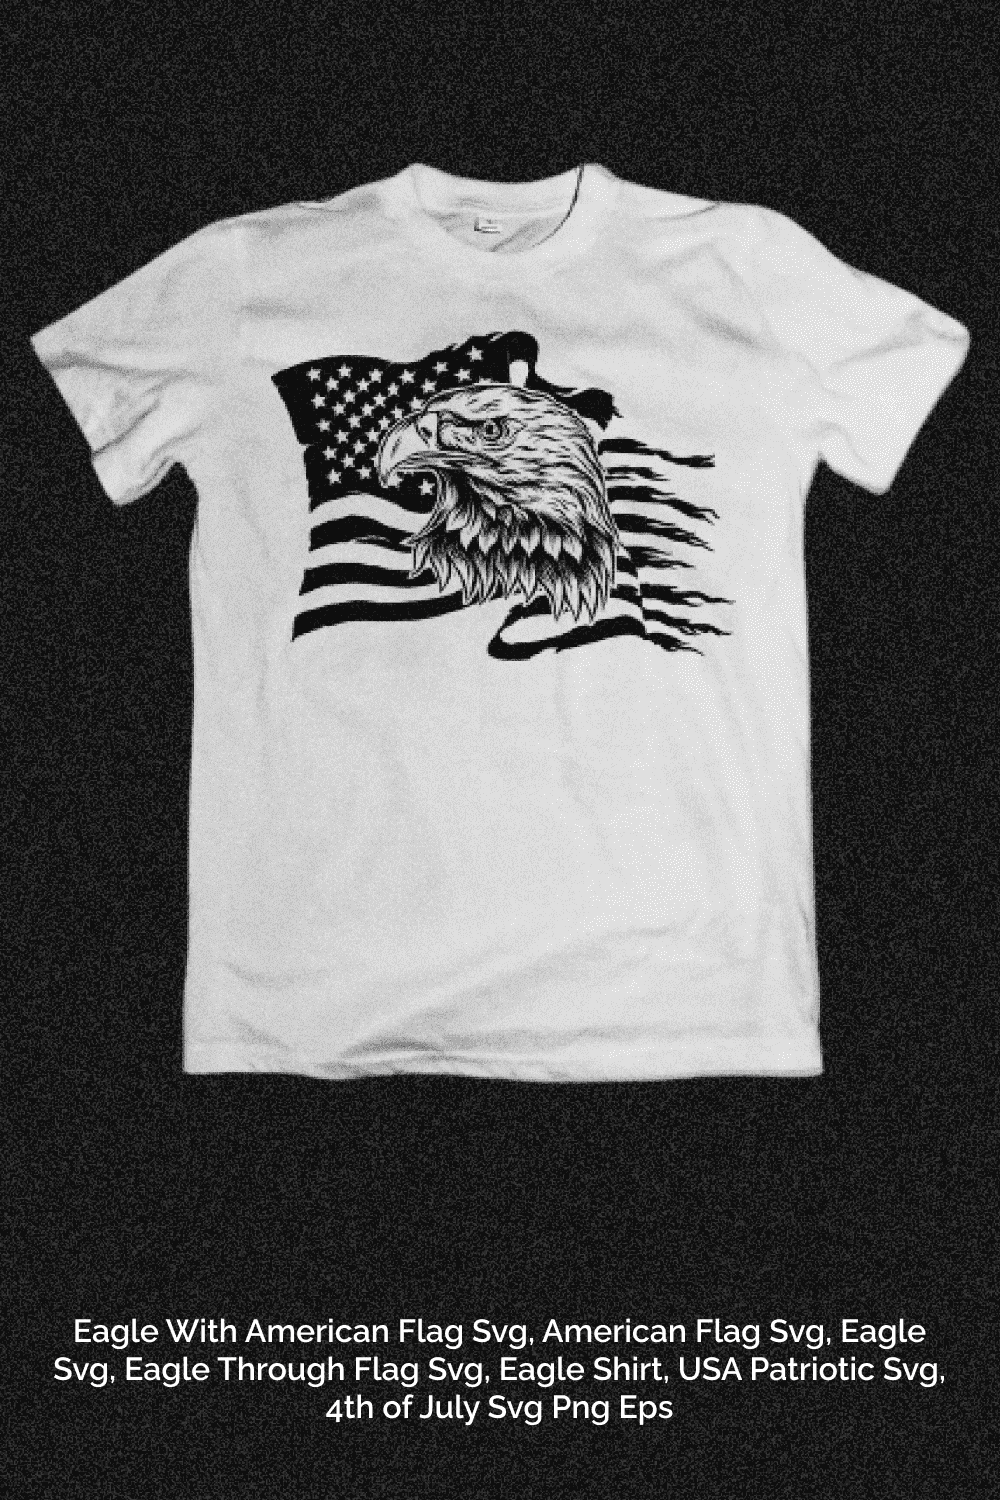 Eagle With American Flag SVG - T-Shirt Preview.